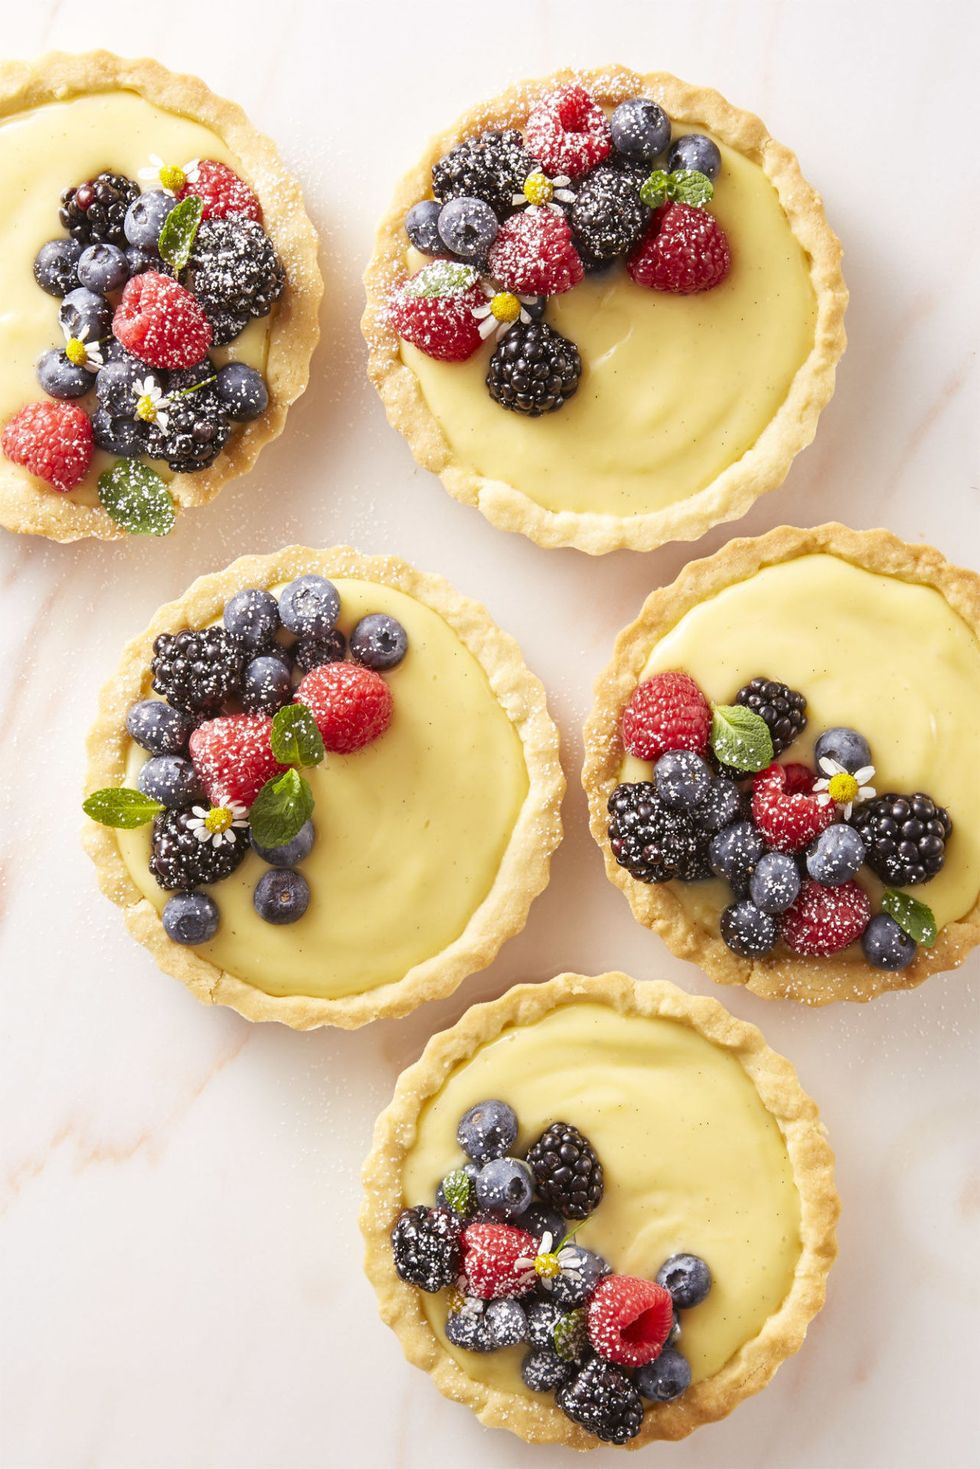 Best Berry Cream Tartlets Recipe - How to Make Very Berry Cream Tartlets